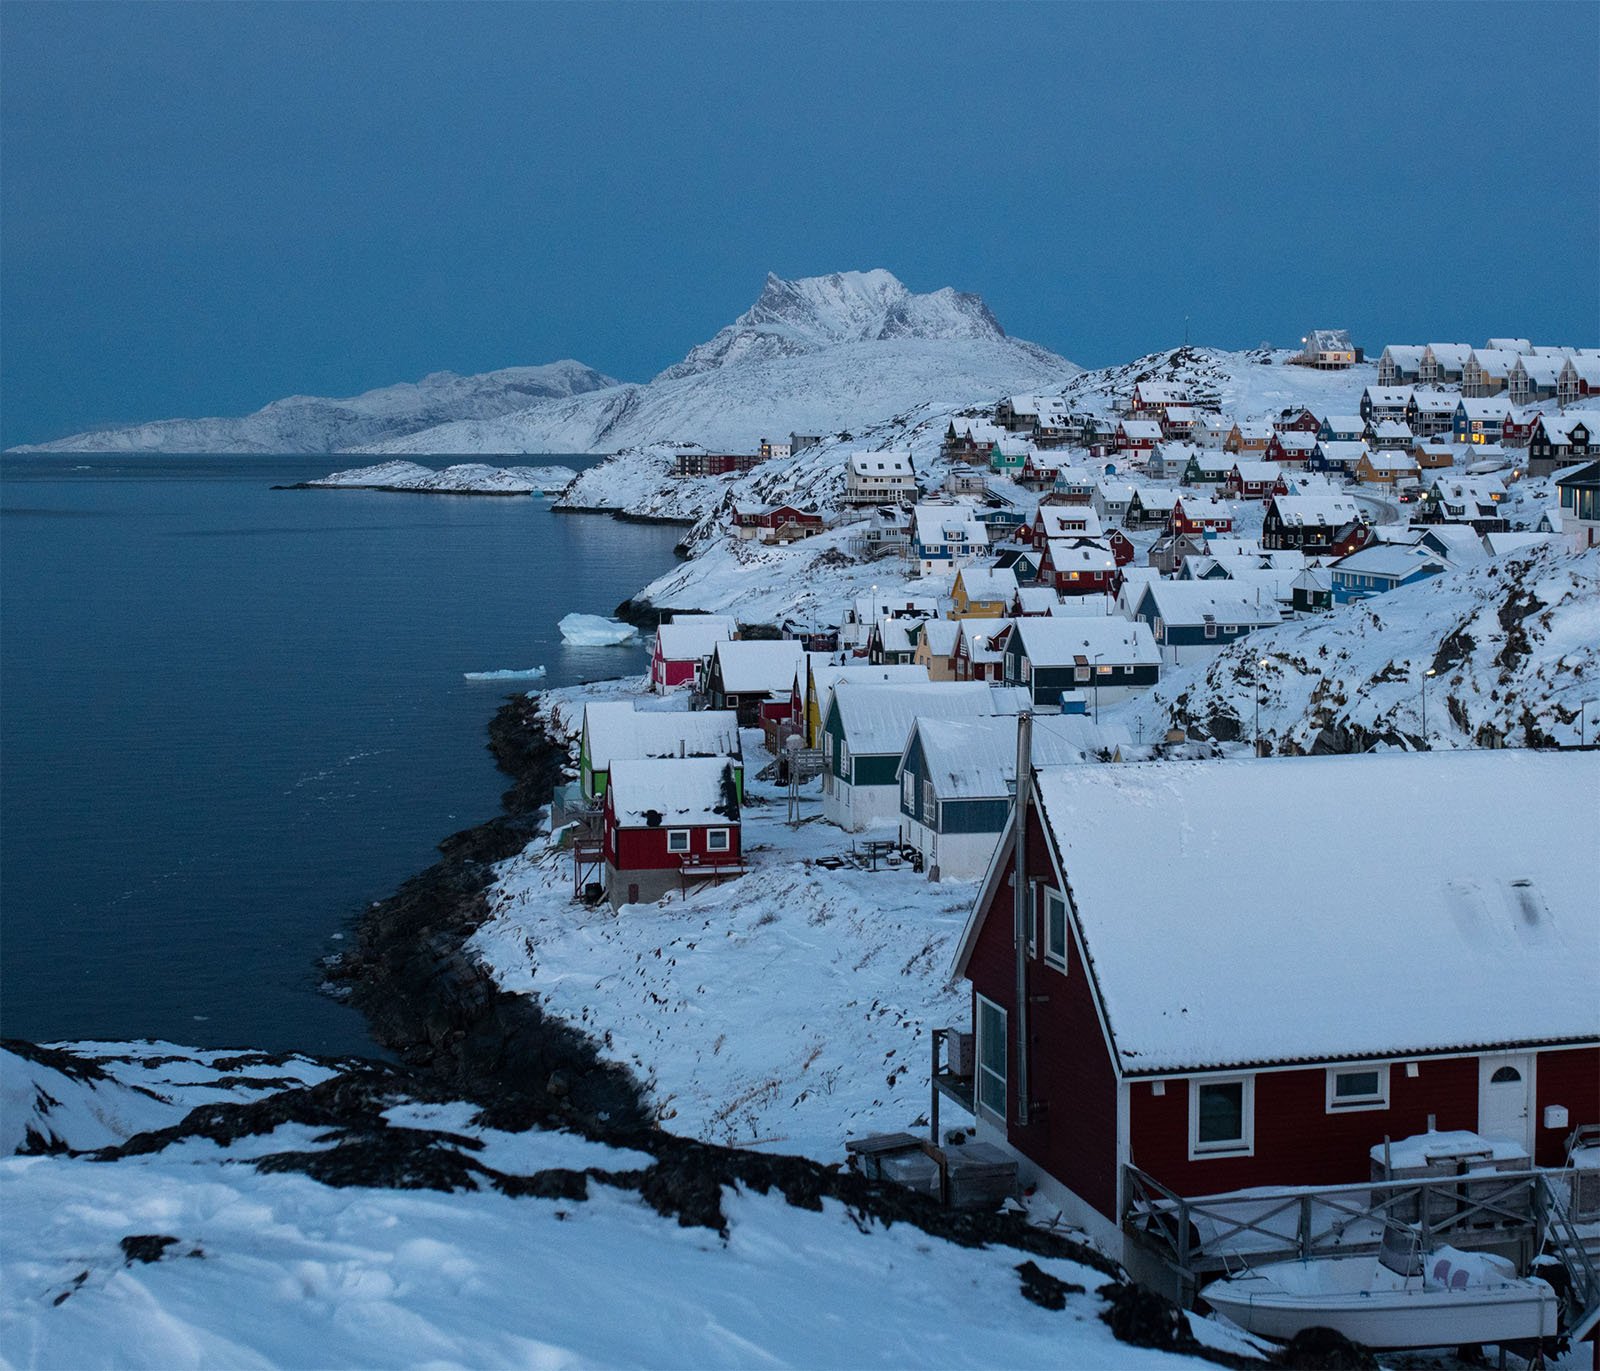 A snowy coastal village with colorful houses overlooking a serene bay, under a dusky blue sky, with rugged mountains in the background.